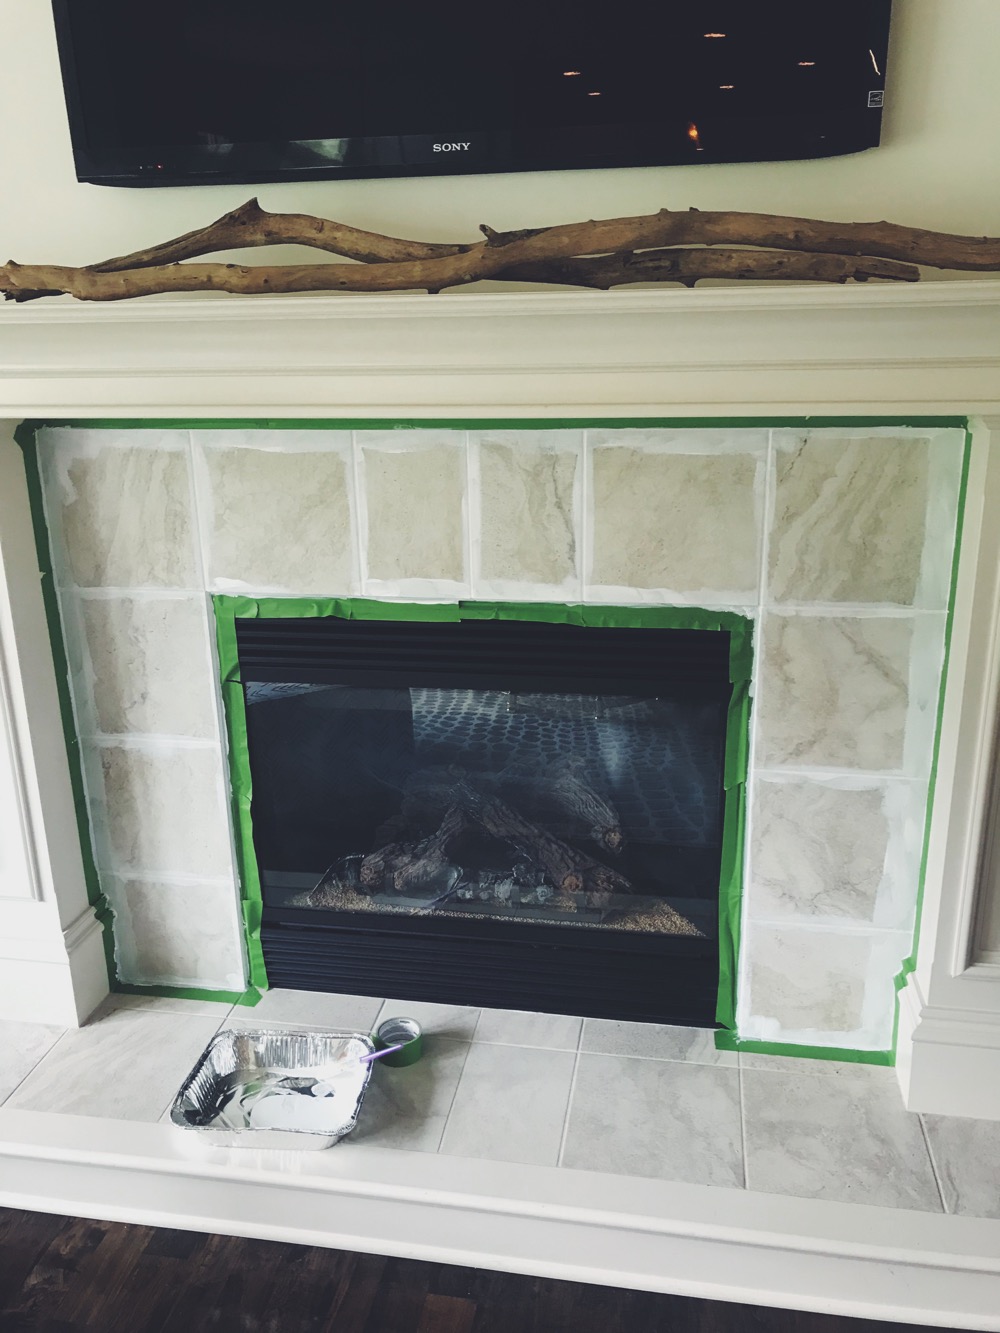 Painted Tile Around Fireplace Life, How To Paint Ceramic Tile Around A Fireplace